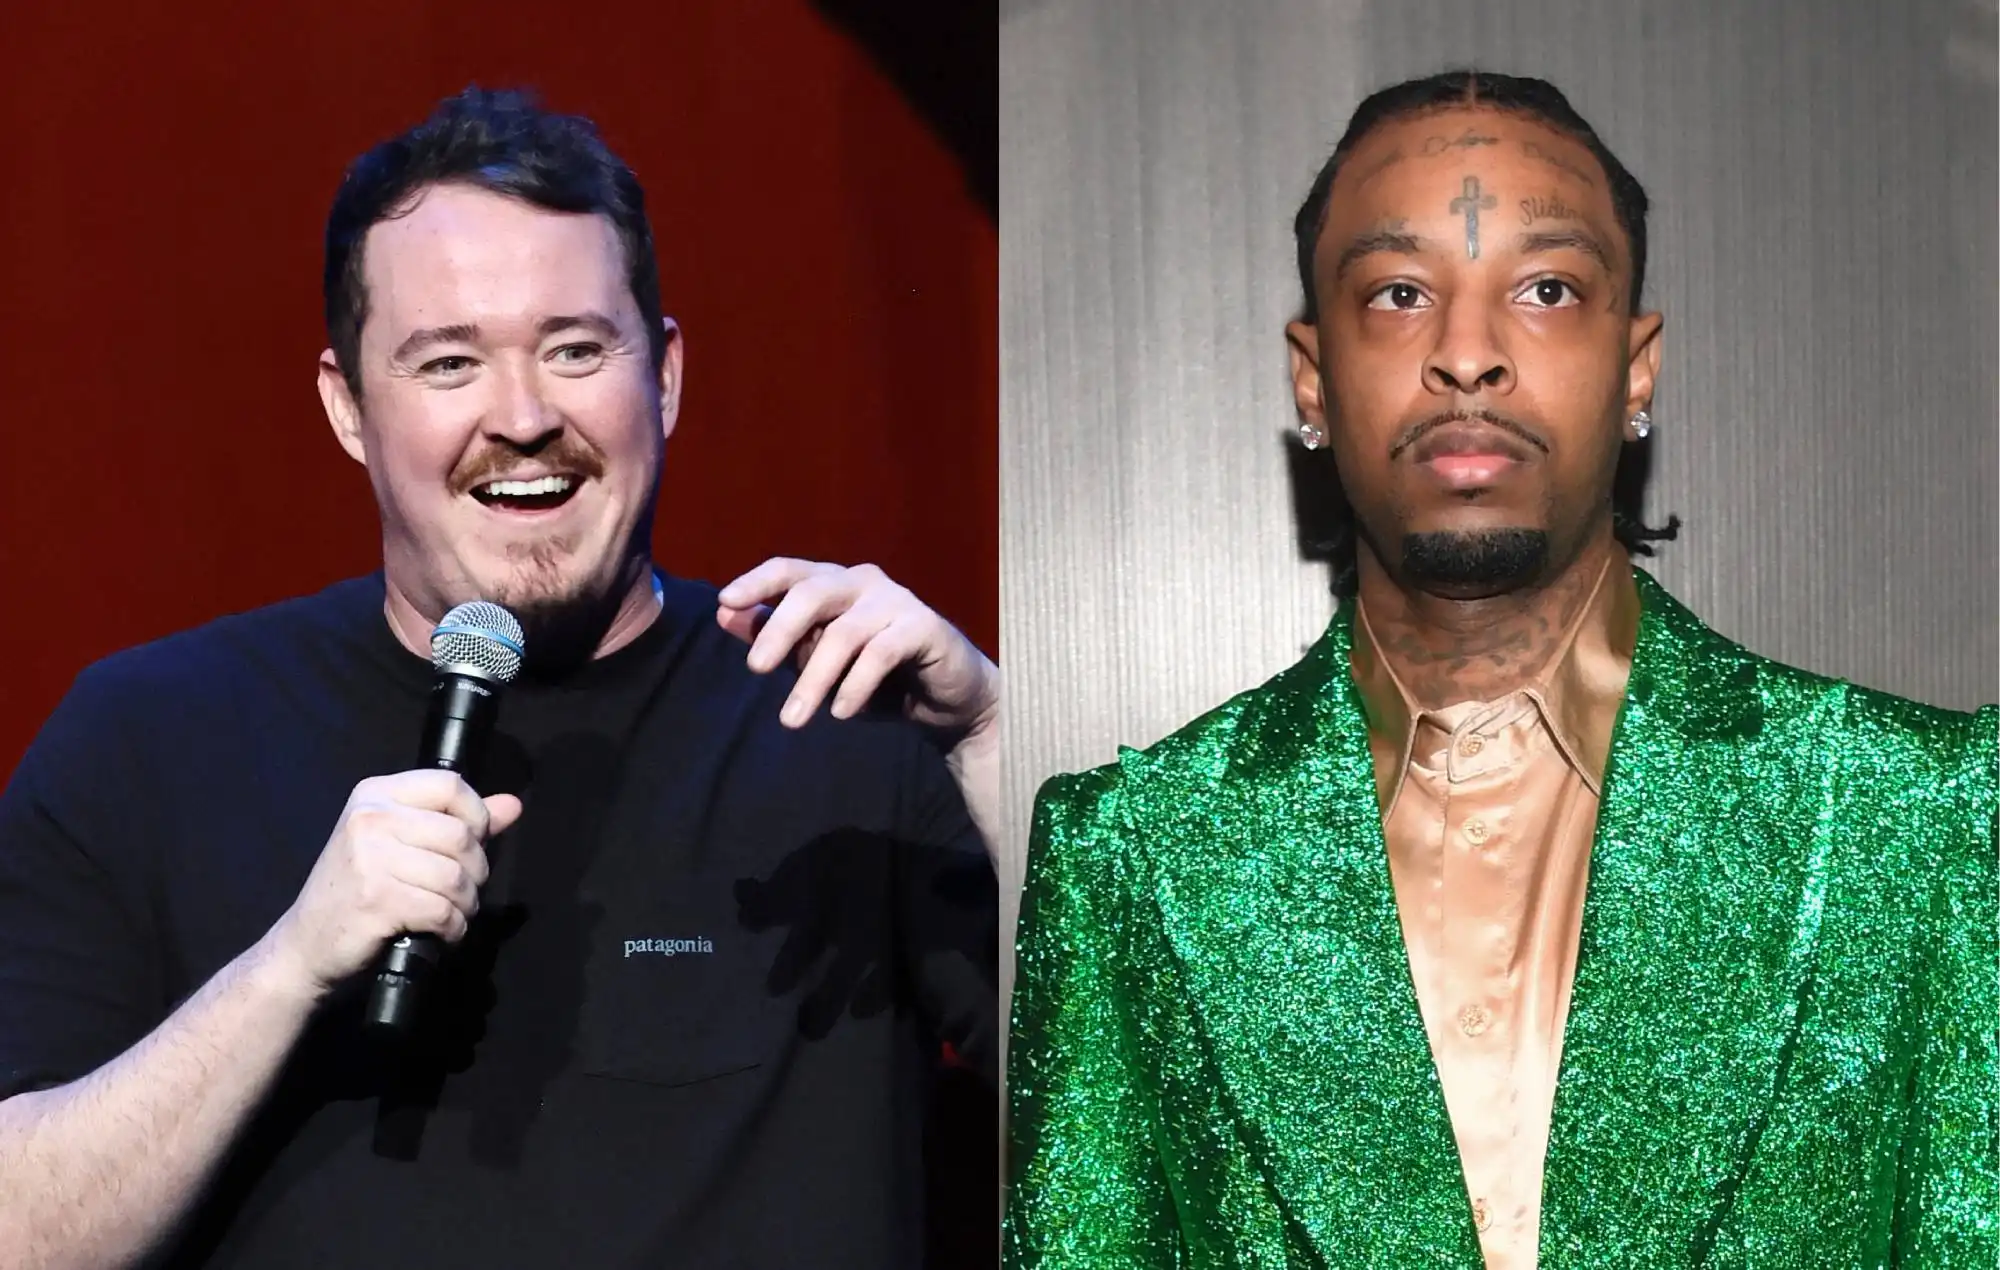 Shane Gillis and 21 Savage Announced as Next Saturday Night Live Hosts